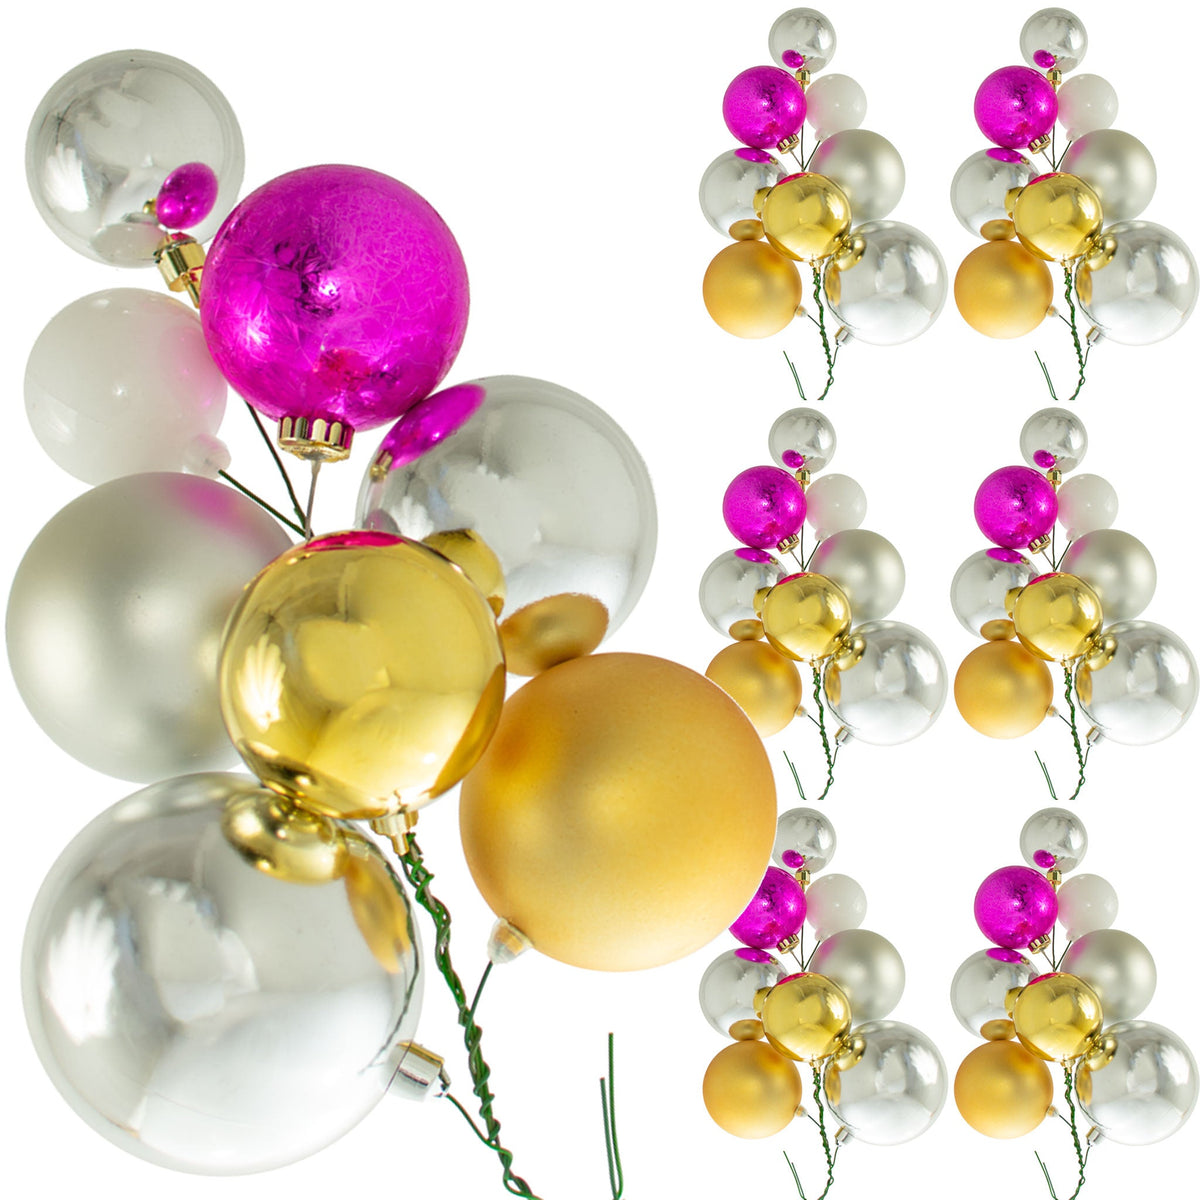 The Gorgeous Berkeley Christmas Ball Ornament Cluster with Shiny Multi-Color Ball Ornaments are sold in sets of 6